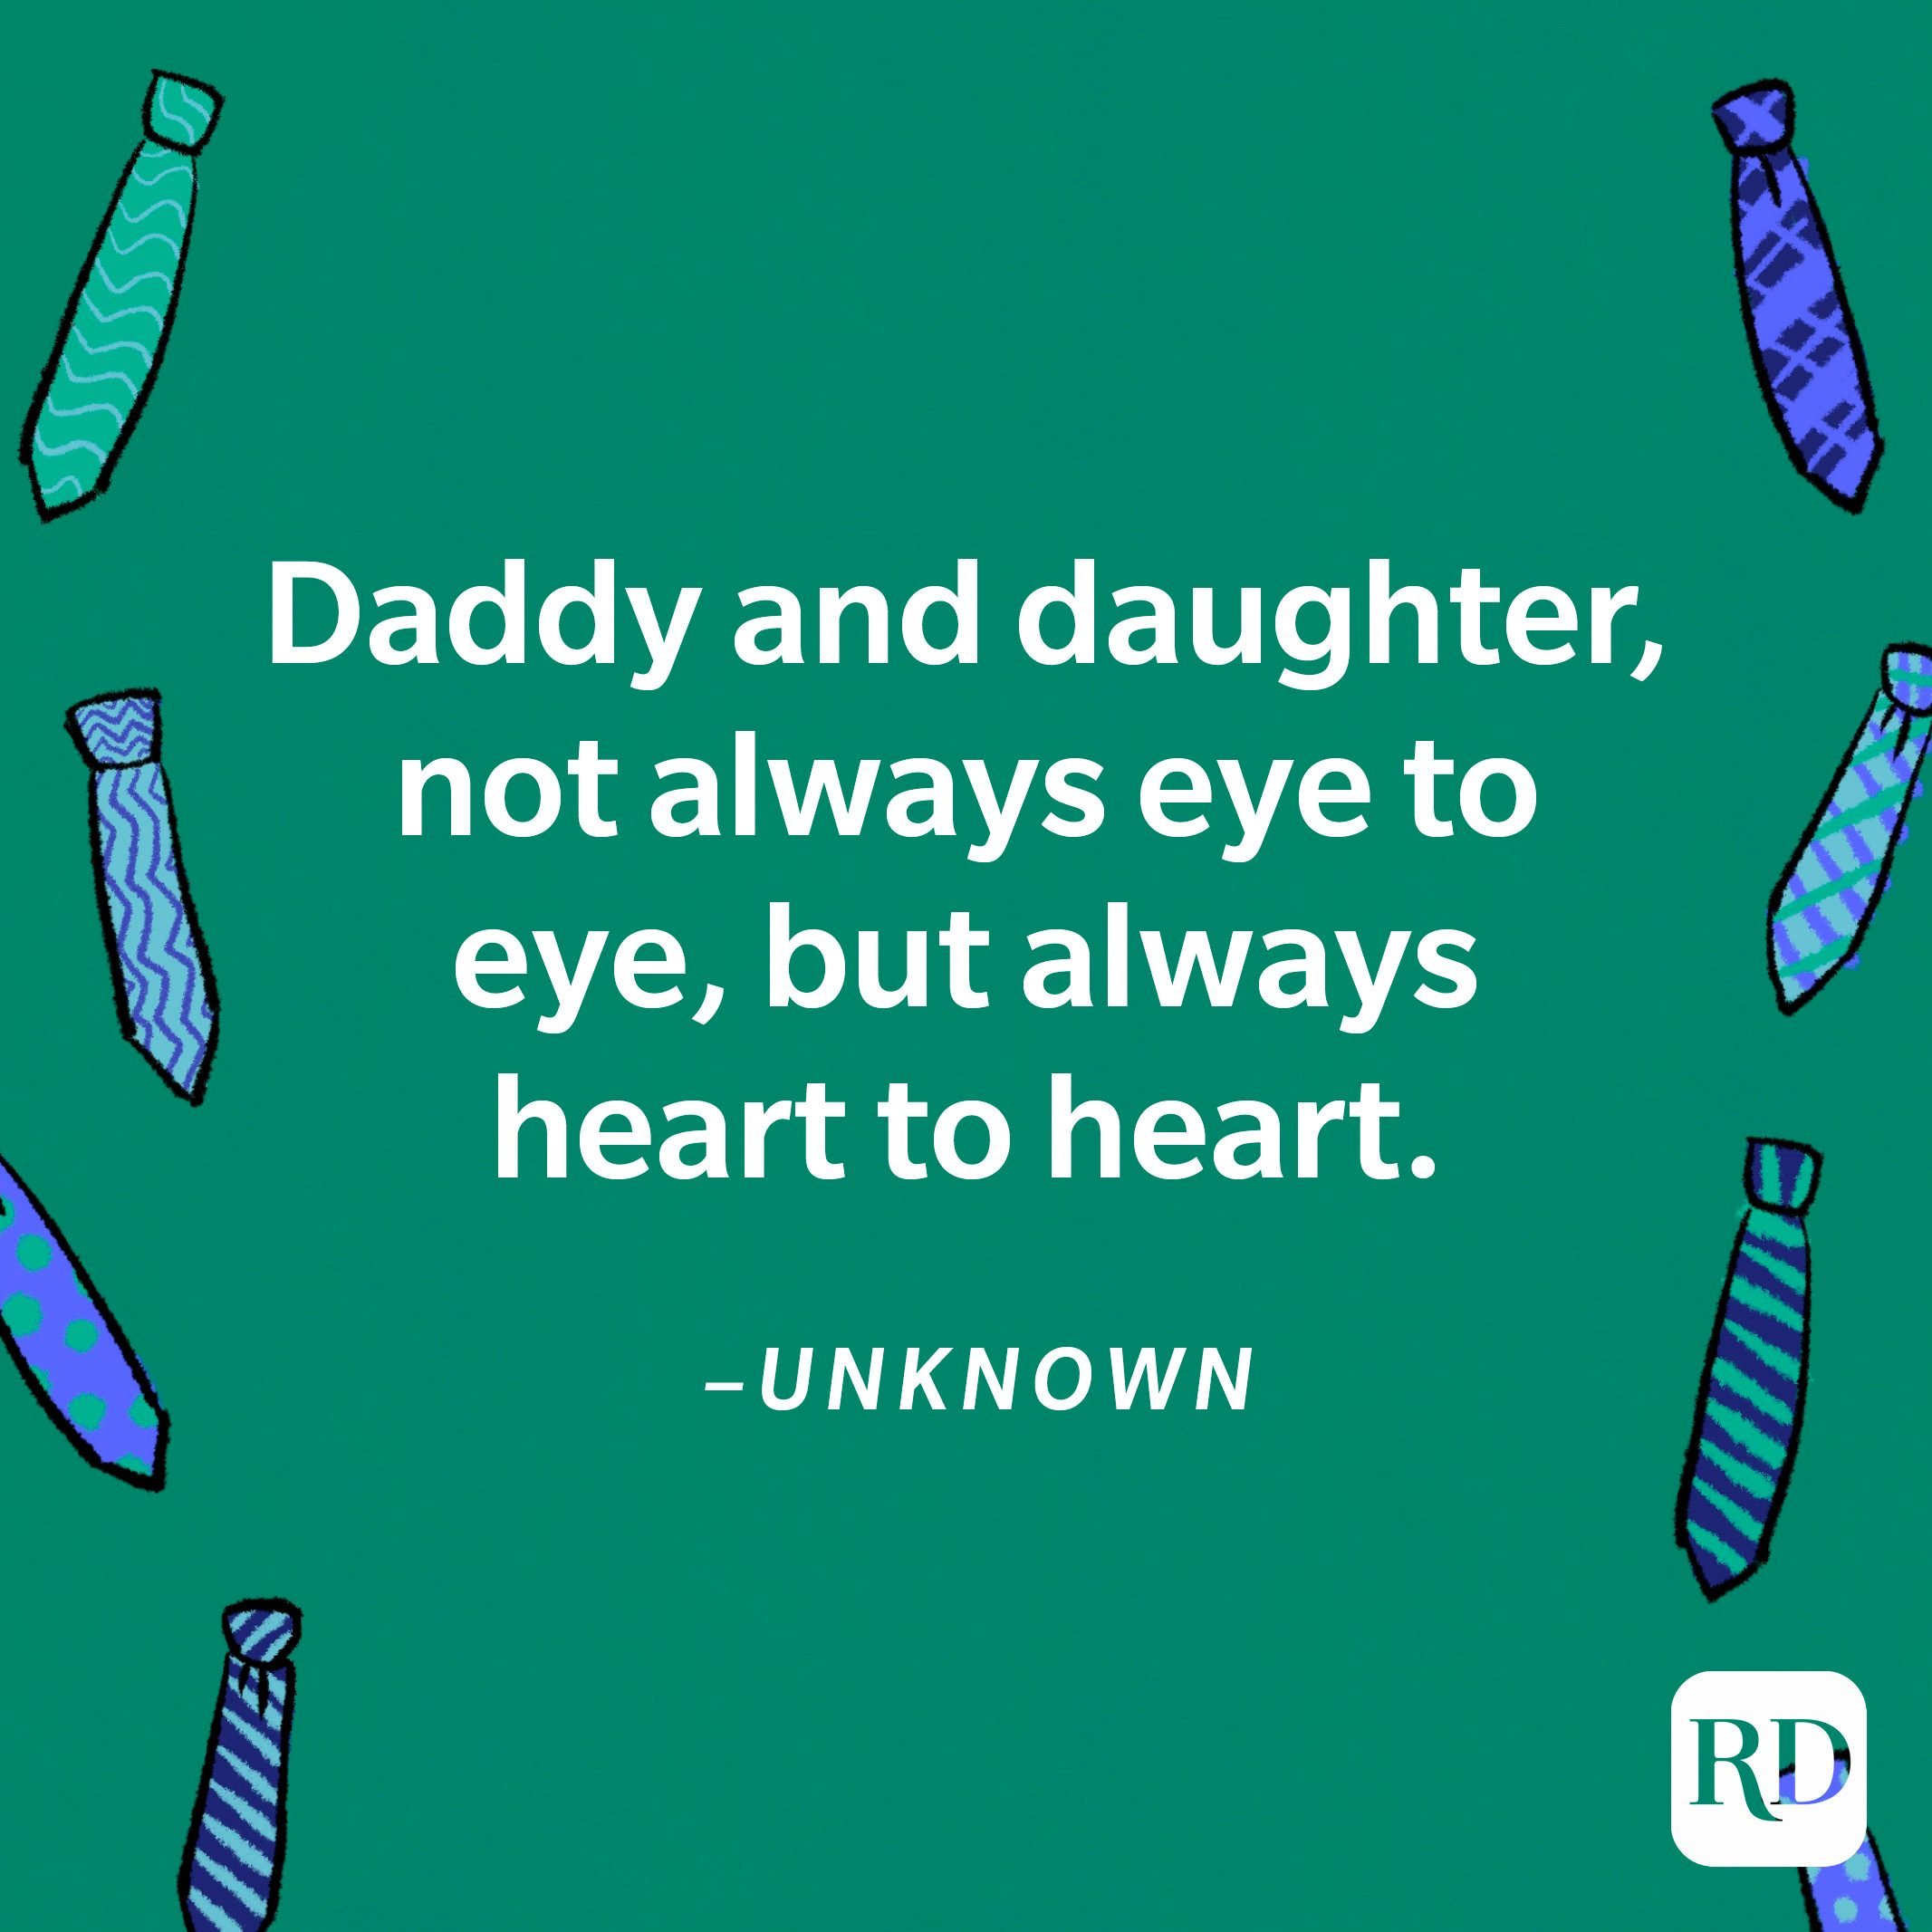 "Daddy and daughter, not always eye to eye, but always heart to heart."—Unknown 12